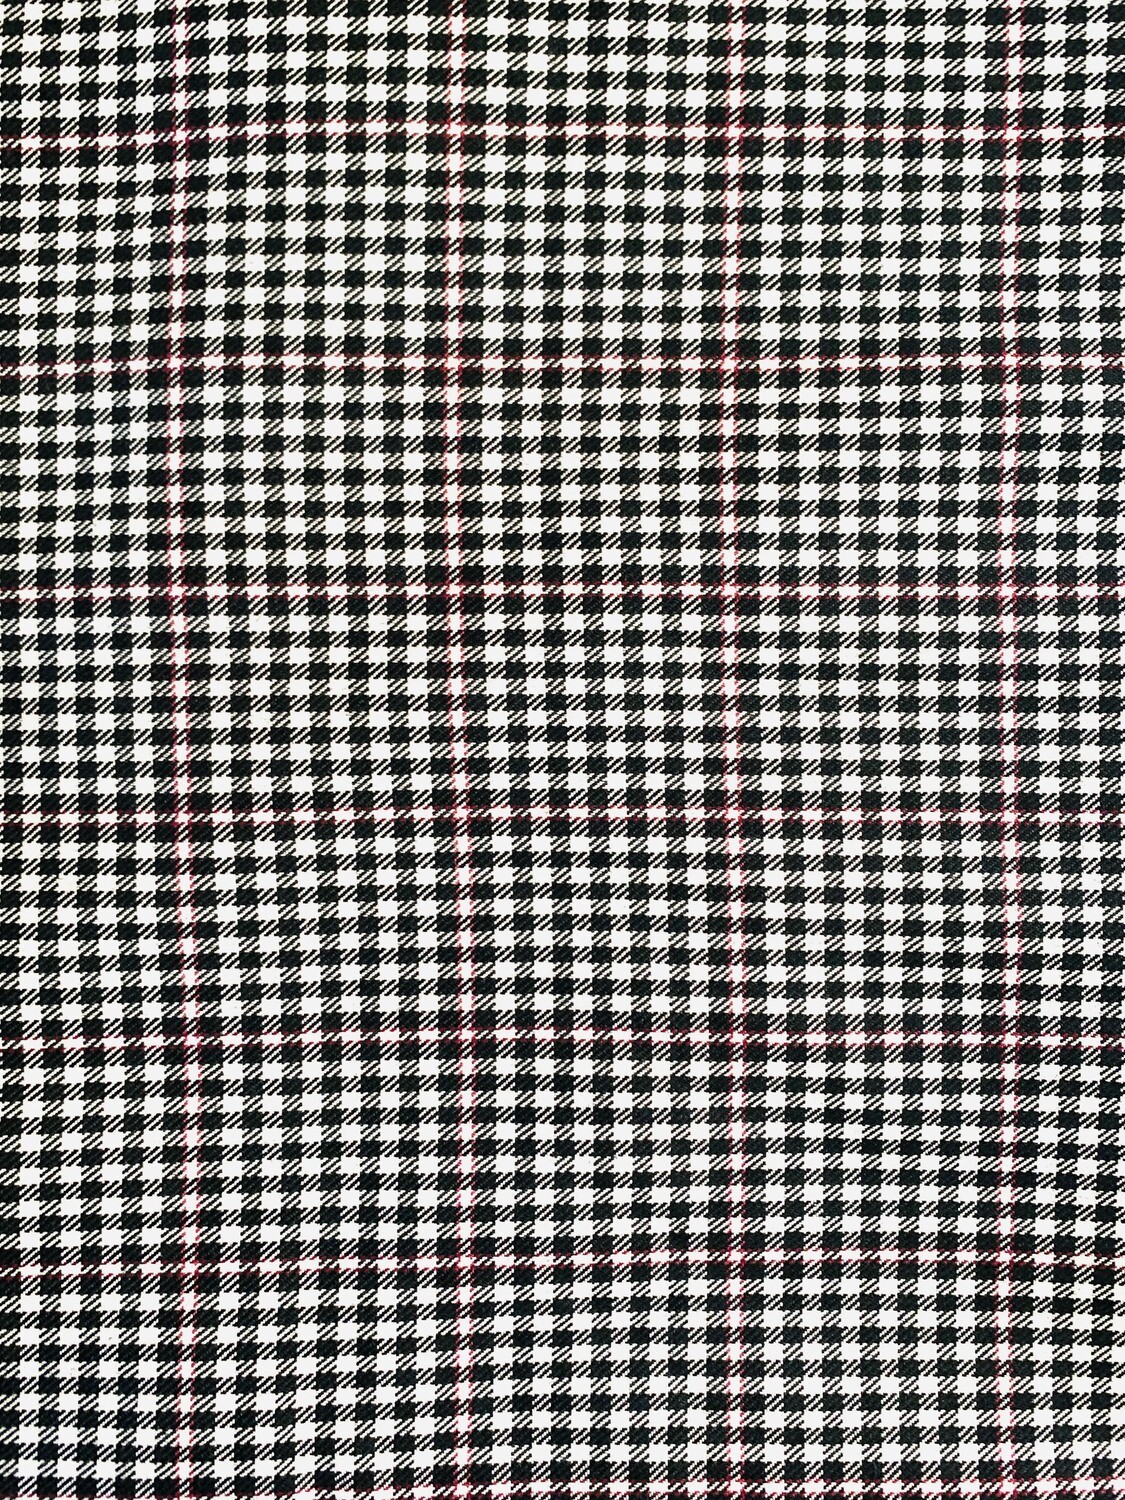 Houndstooth Plaid | Suiting Fabric | 145cm Wide